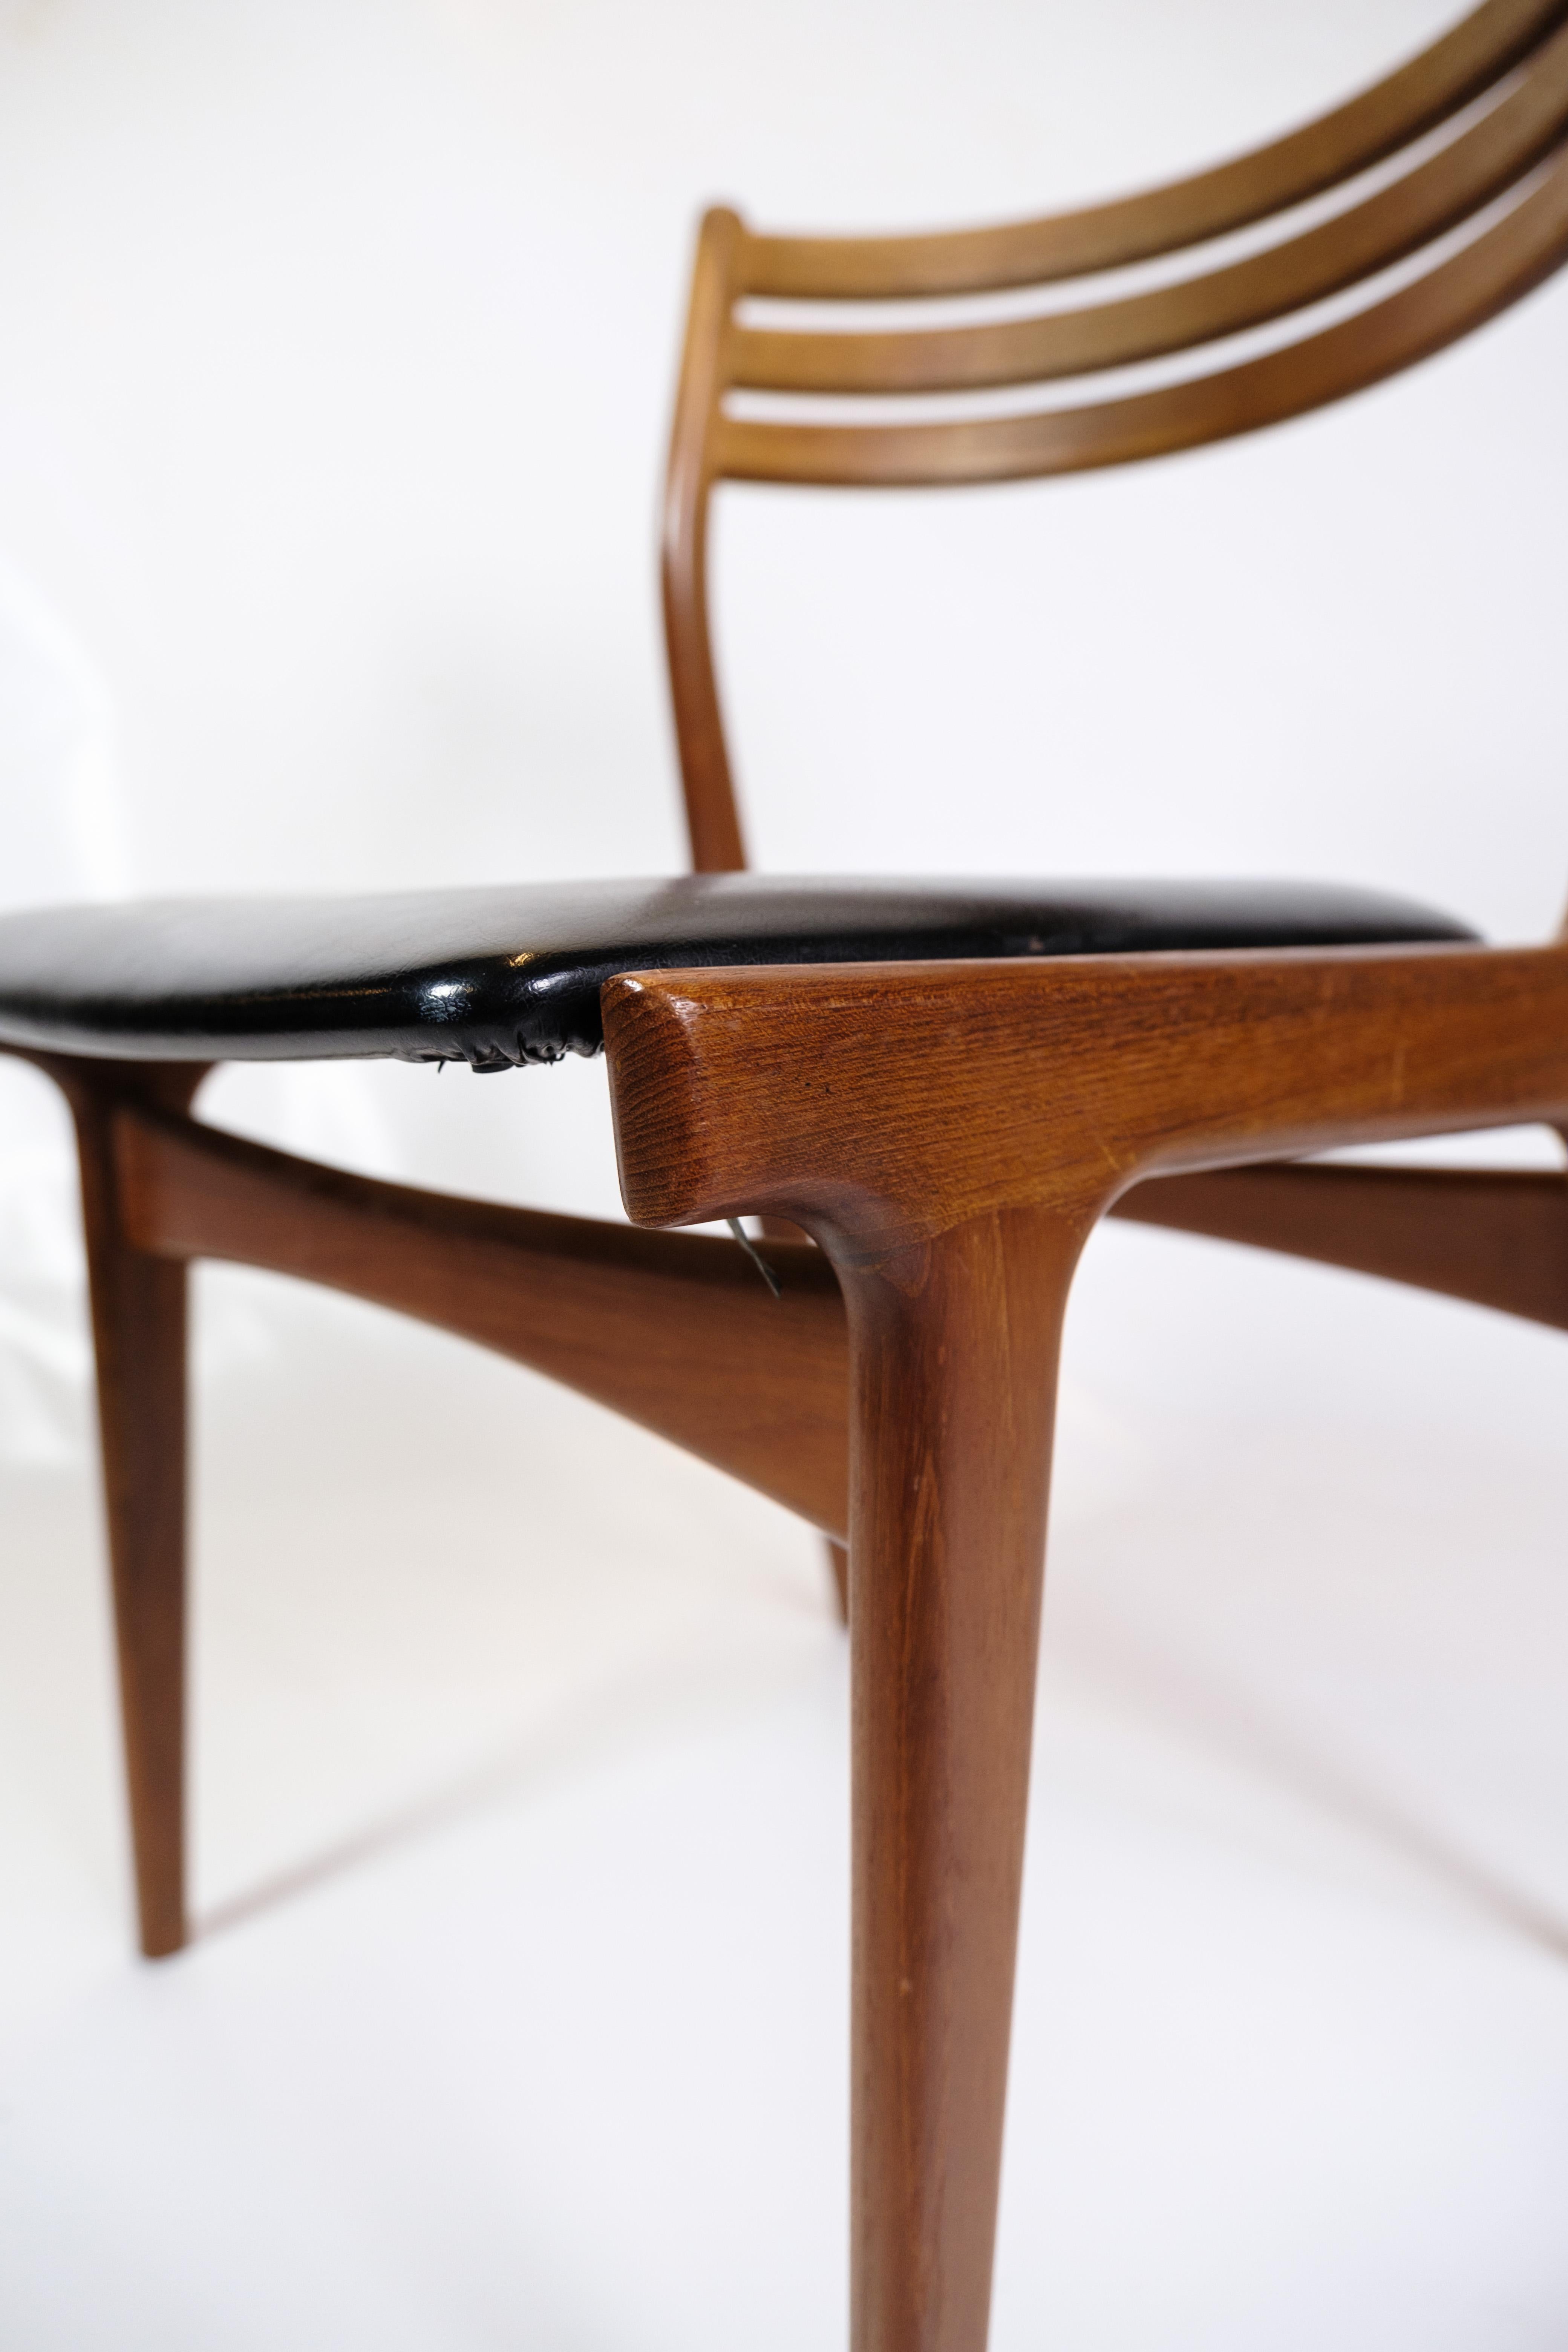 Leather Set Of 6 Dining Room Chairs Model U20 Made In Teak By Johannes Andersen 1960s For Sale